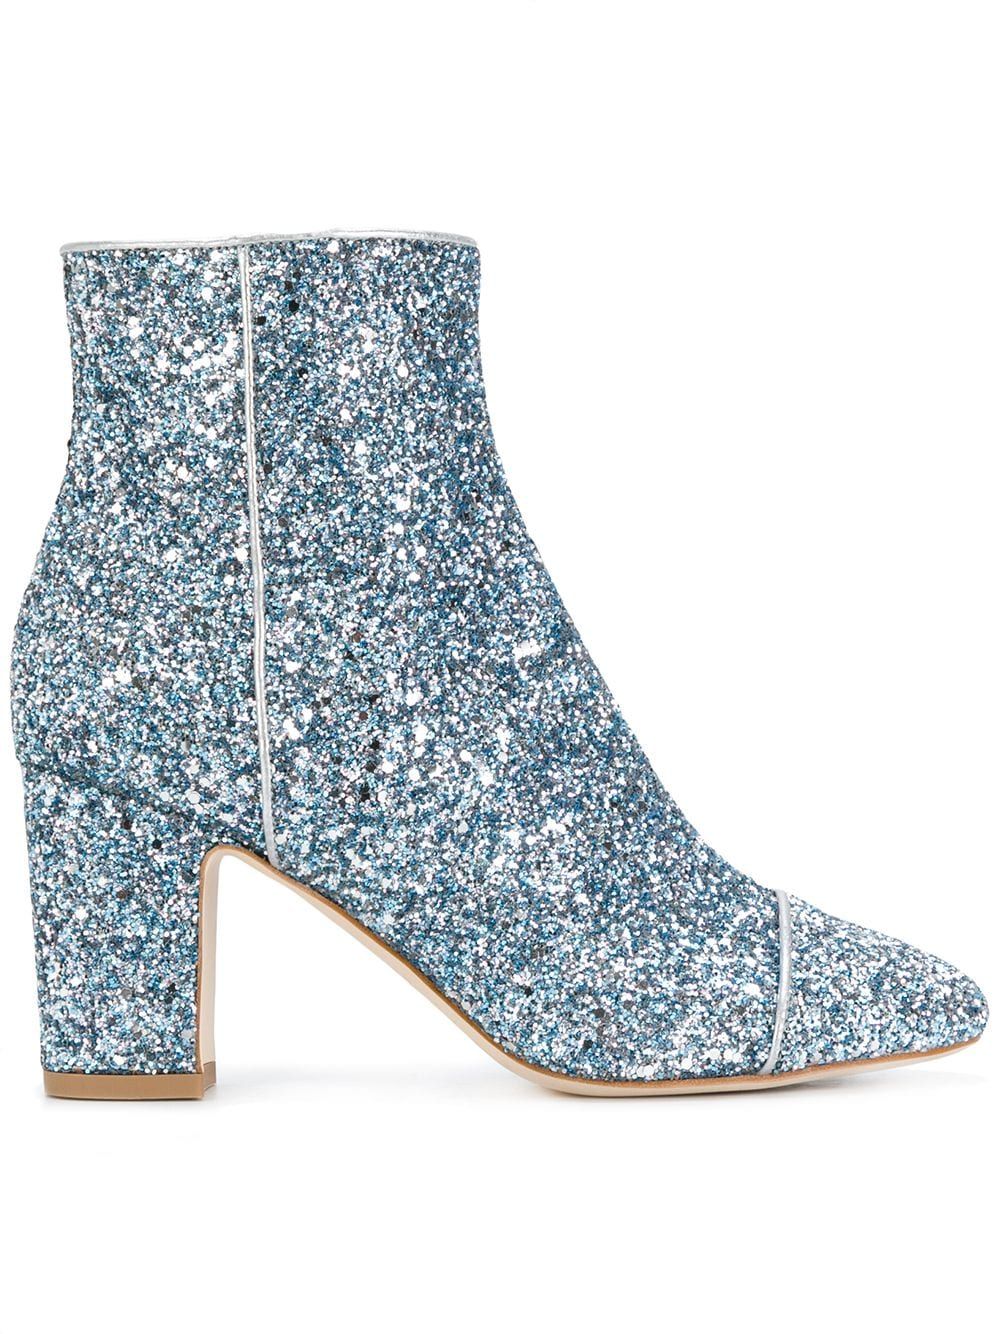 Polly Plume Ally Sparkling sequin boots - Blue | FarFetch US